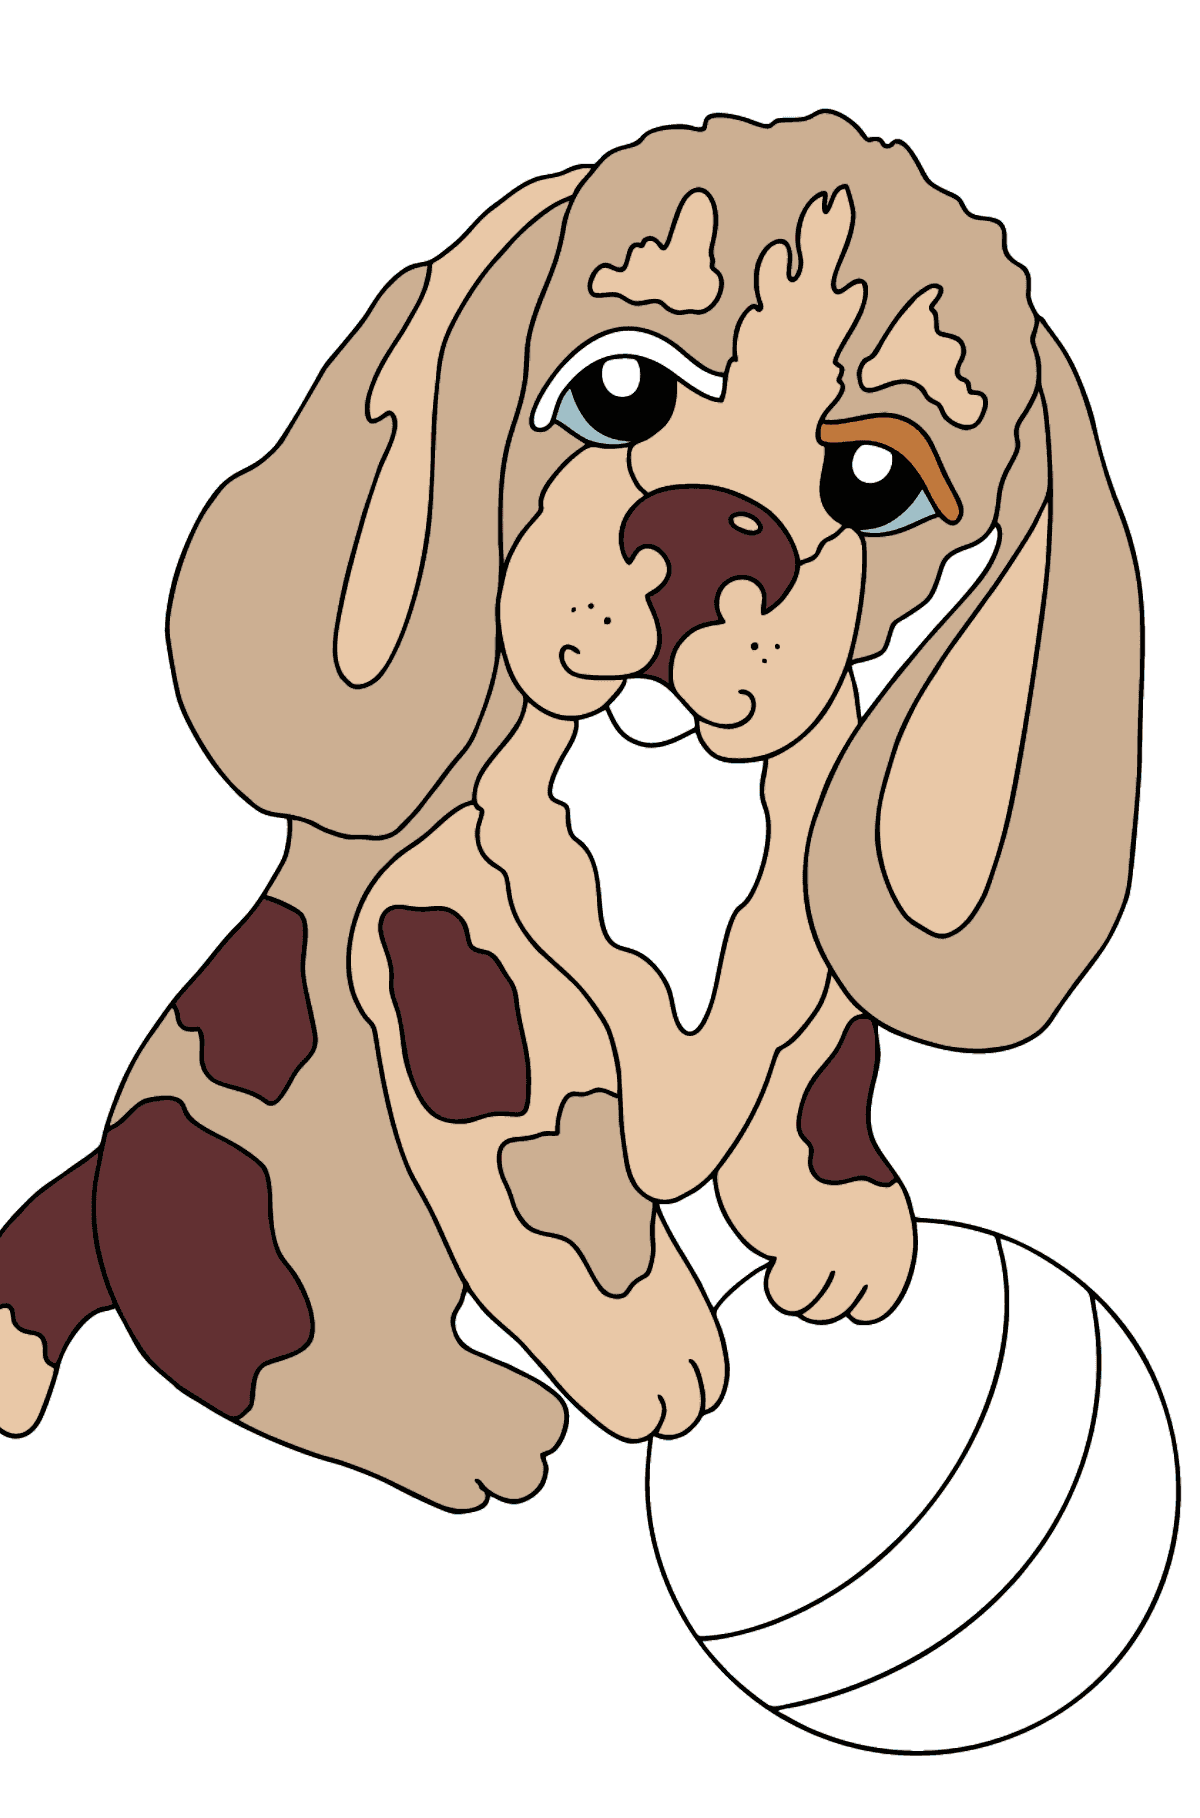 Coloring Page - A Dog with a Ball - Coloring Pages for Kids